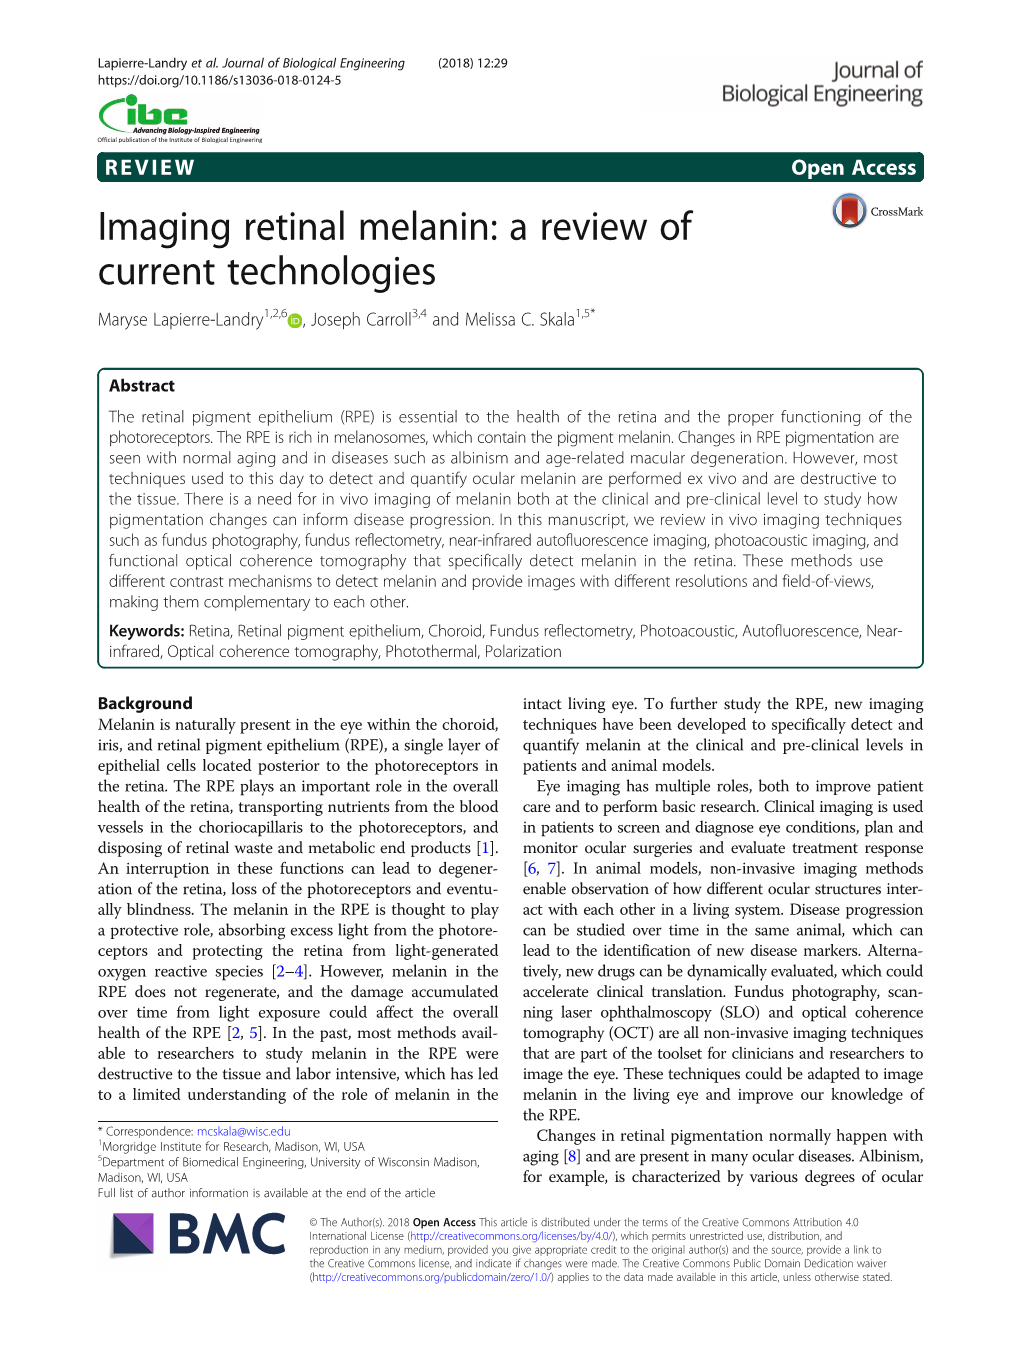 Imaging Retinal Melanin: a Review of Current Technologies Maryse Lapierre-Landry1,2,6 , Joseph Carroll3,4 and Melissa C